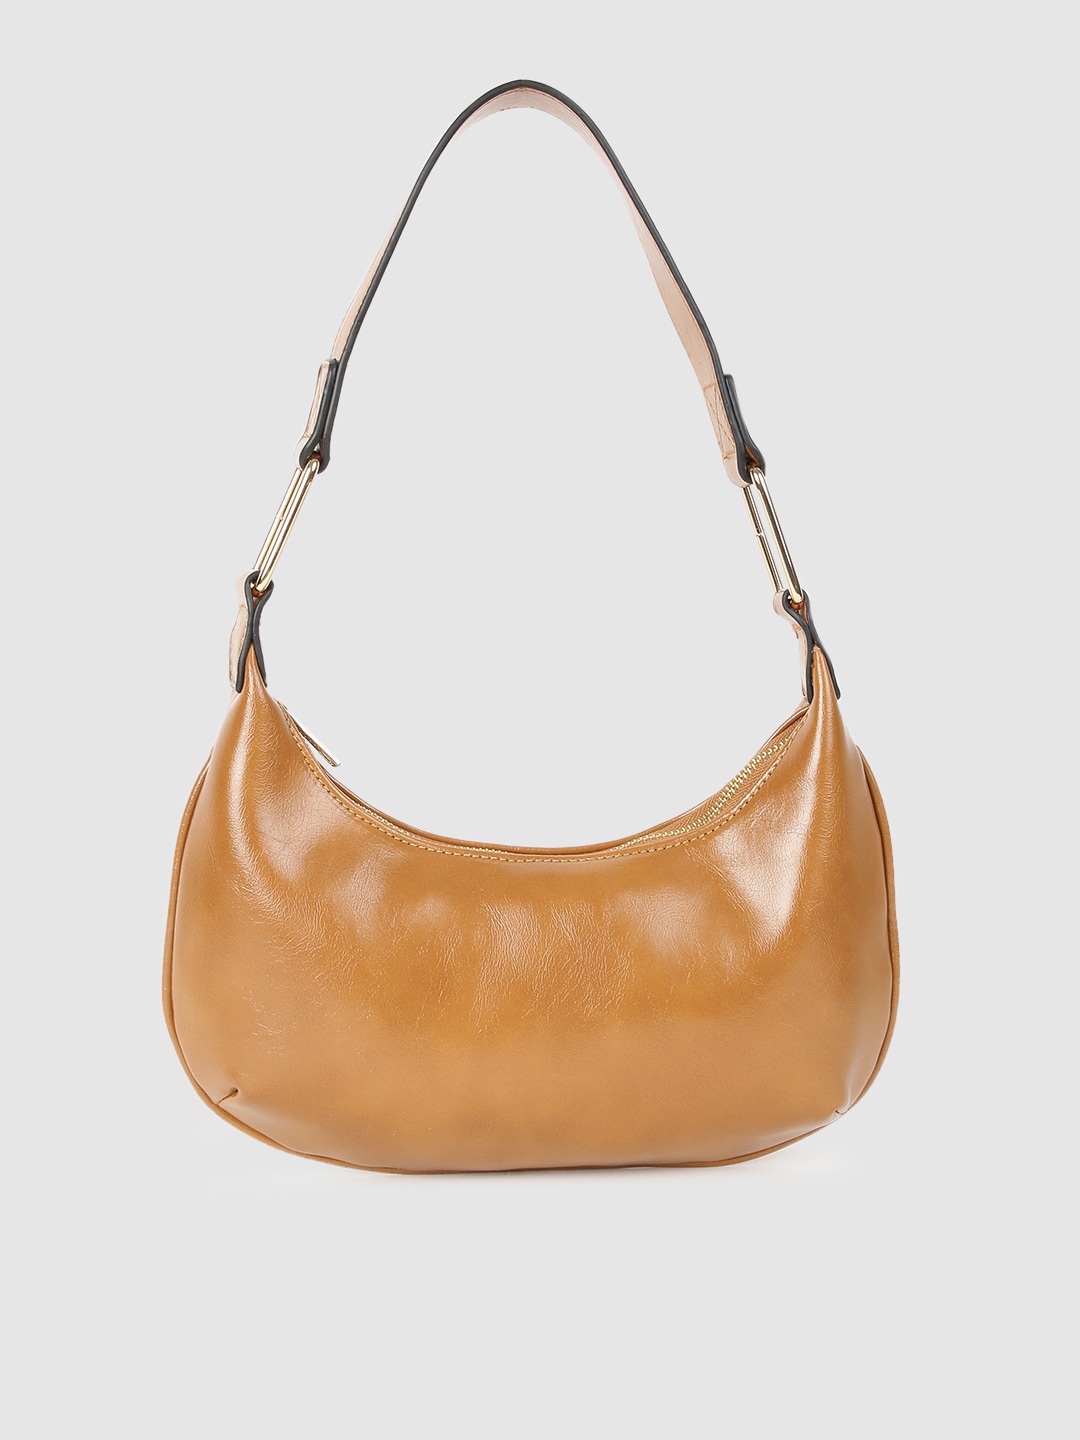 DressBerry Tan Brown Structured Hobo Bag Price in India